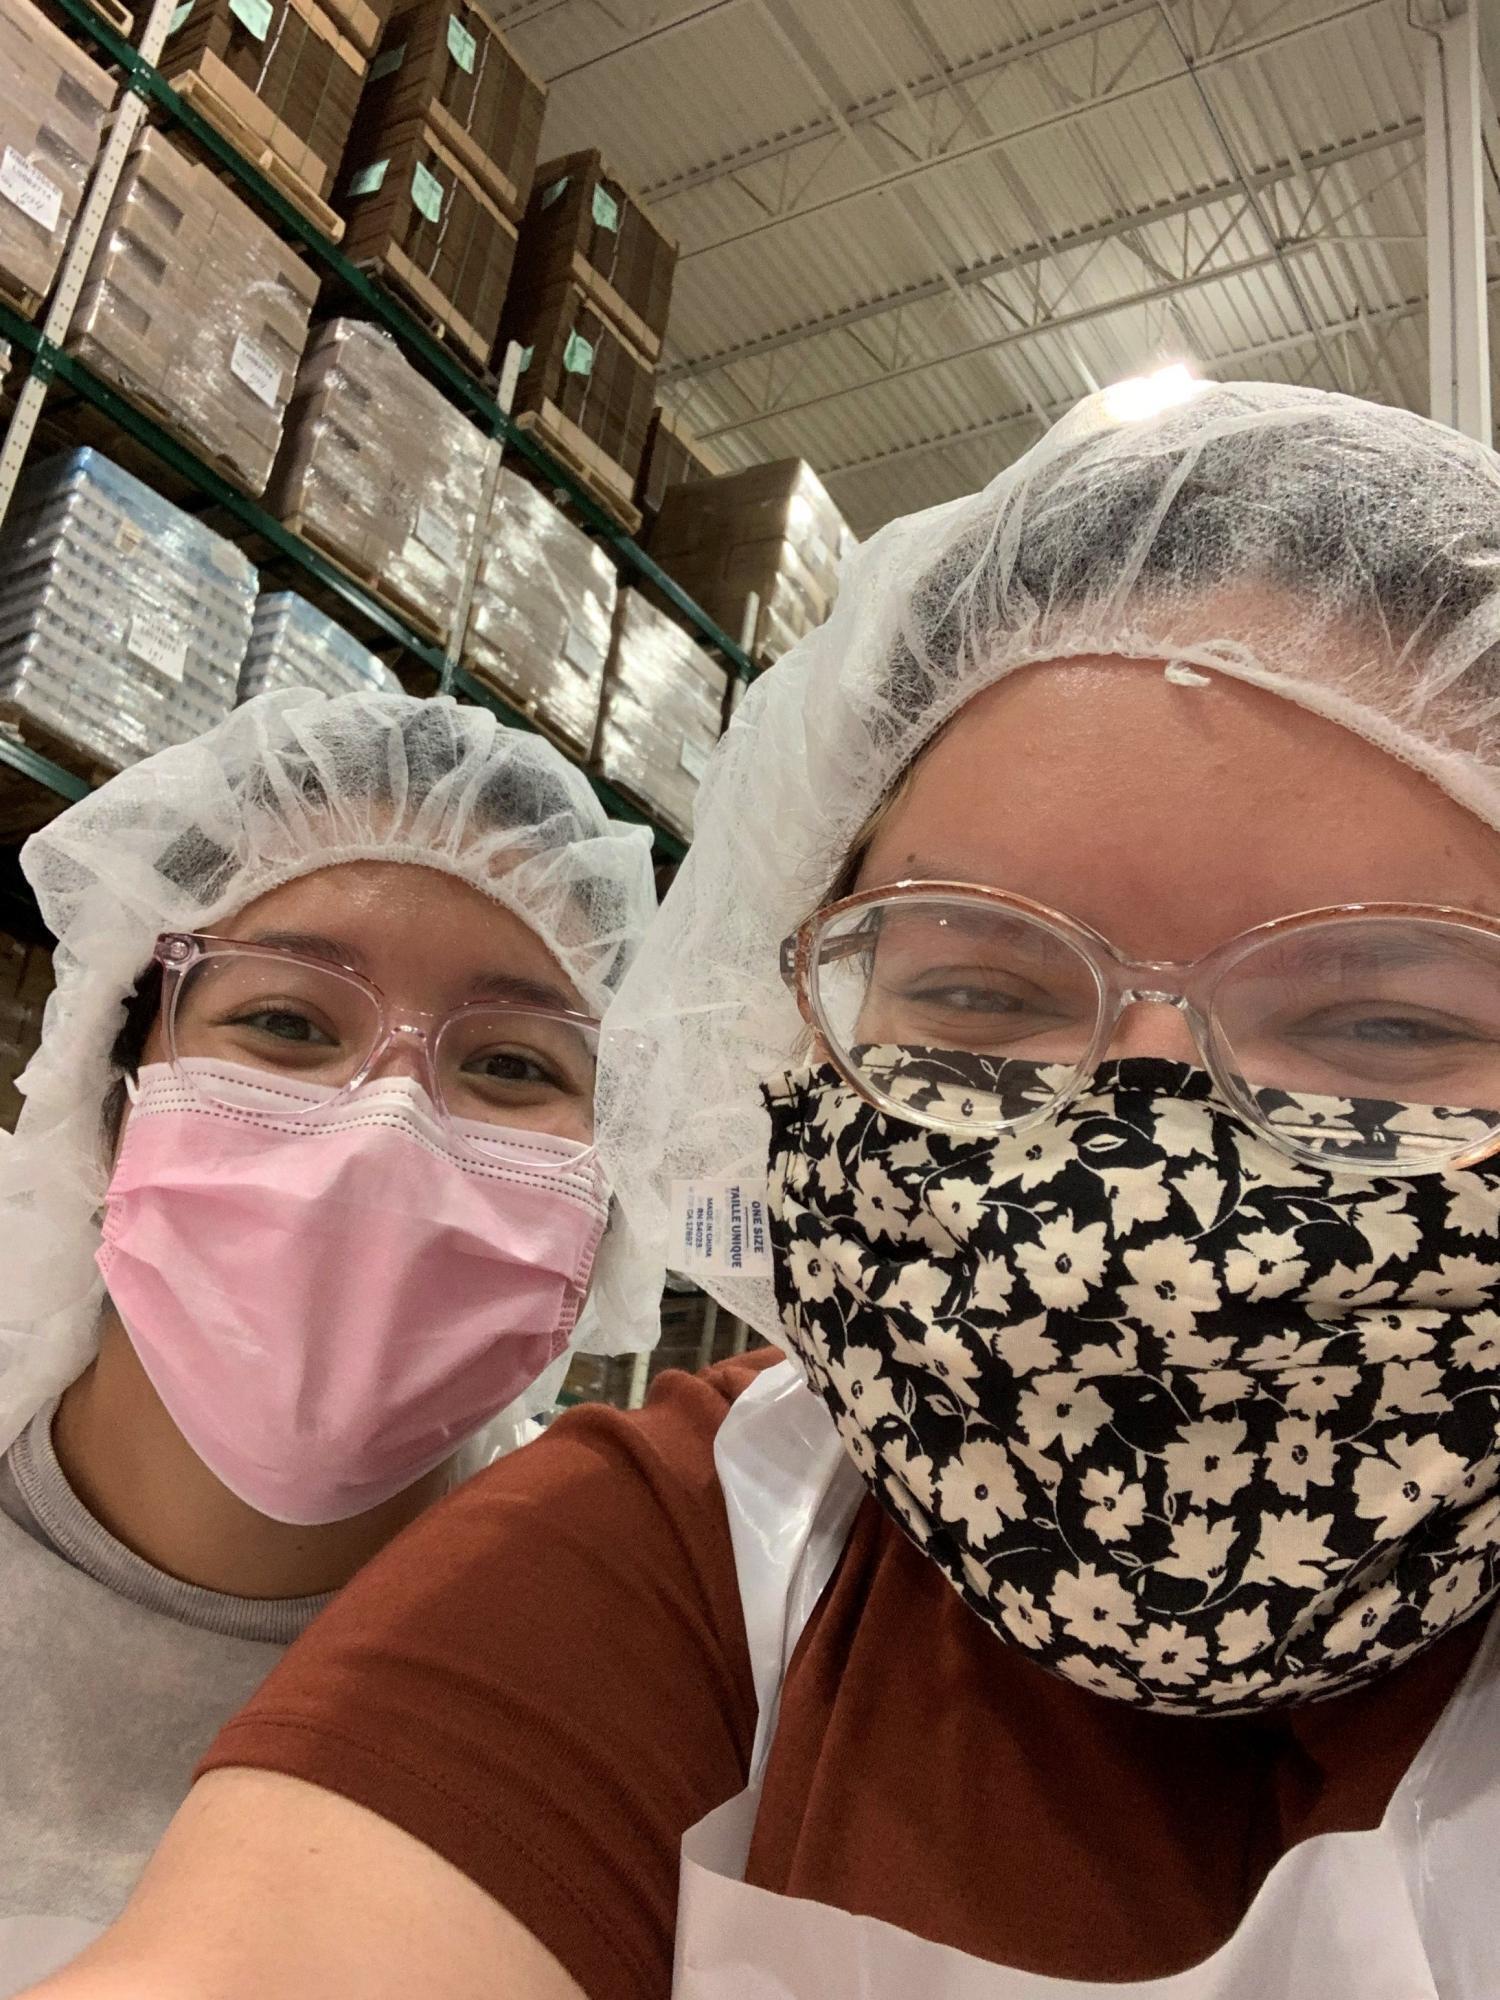 Two young women wearing hair nets in a warehouse